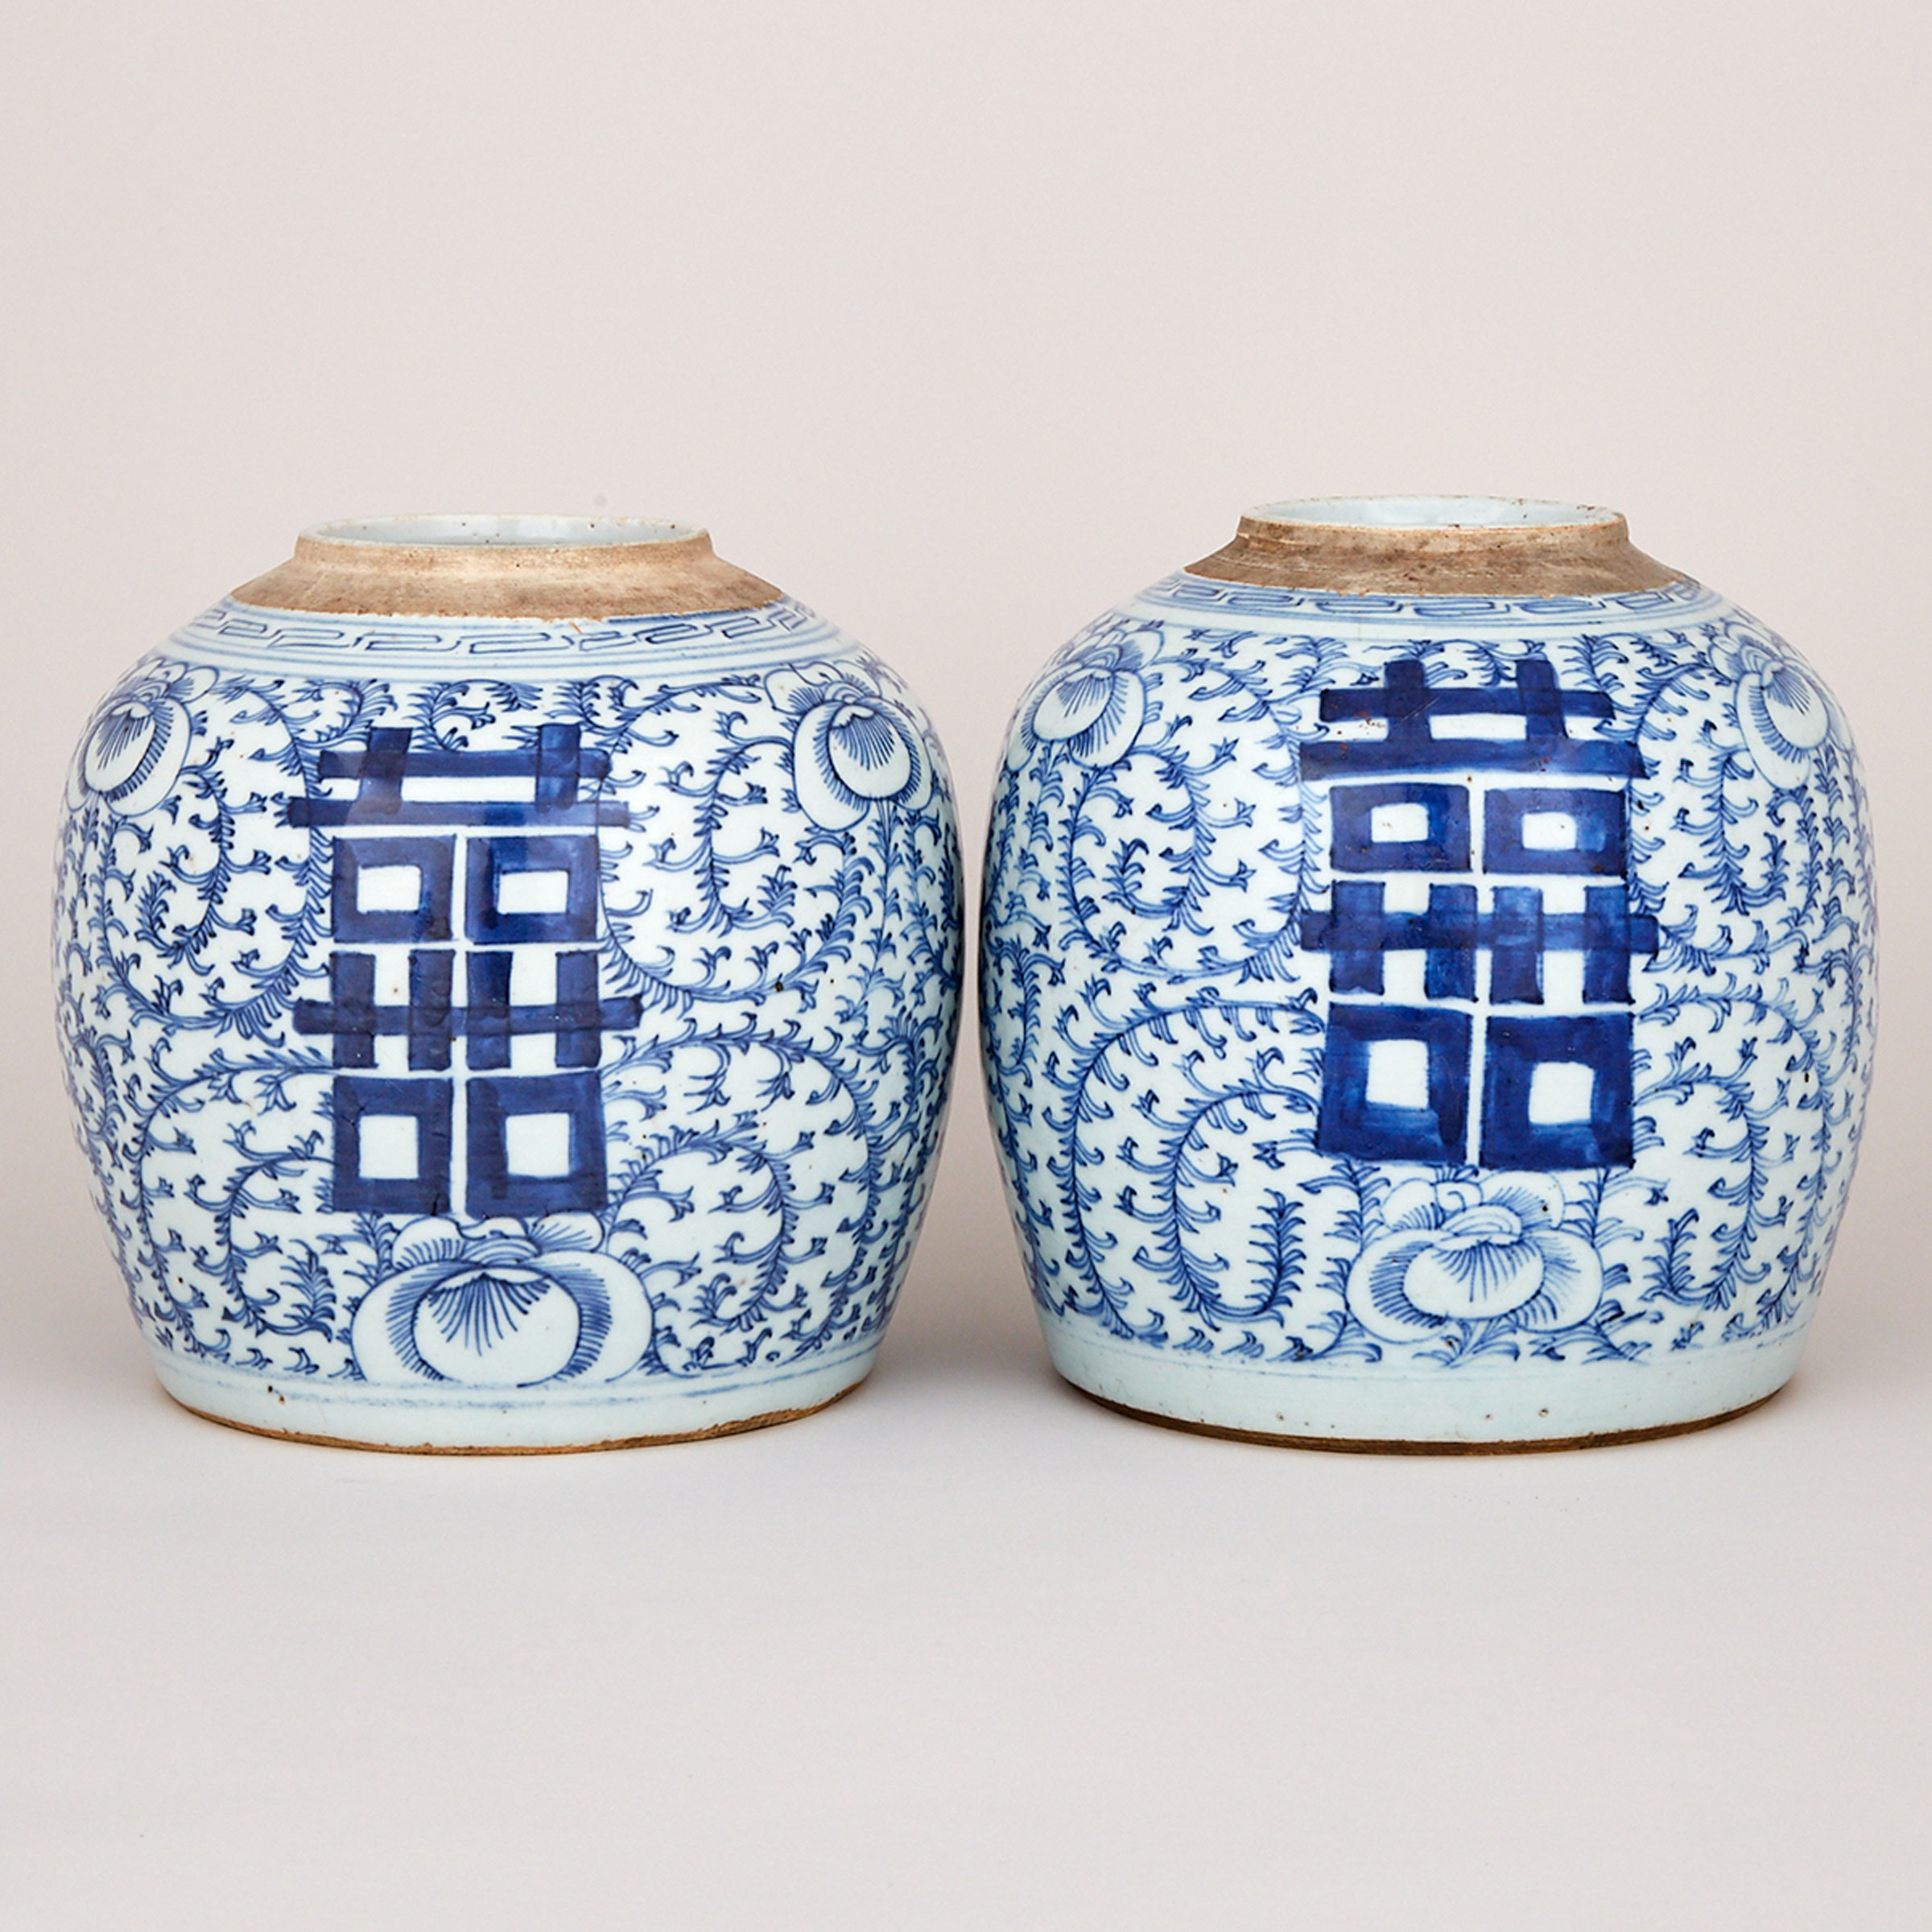 A Pair of Blue and White Ginger Jars, 19th Century